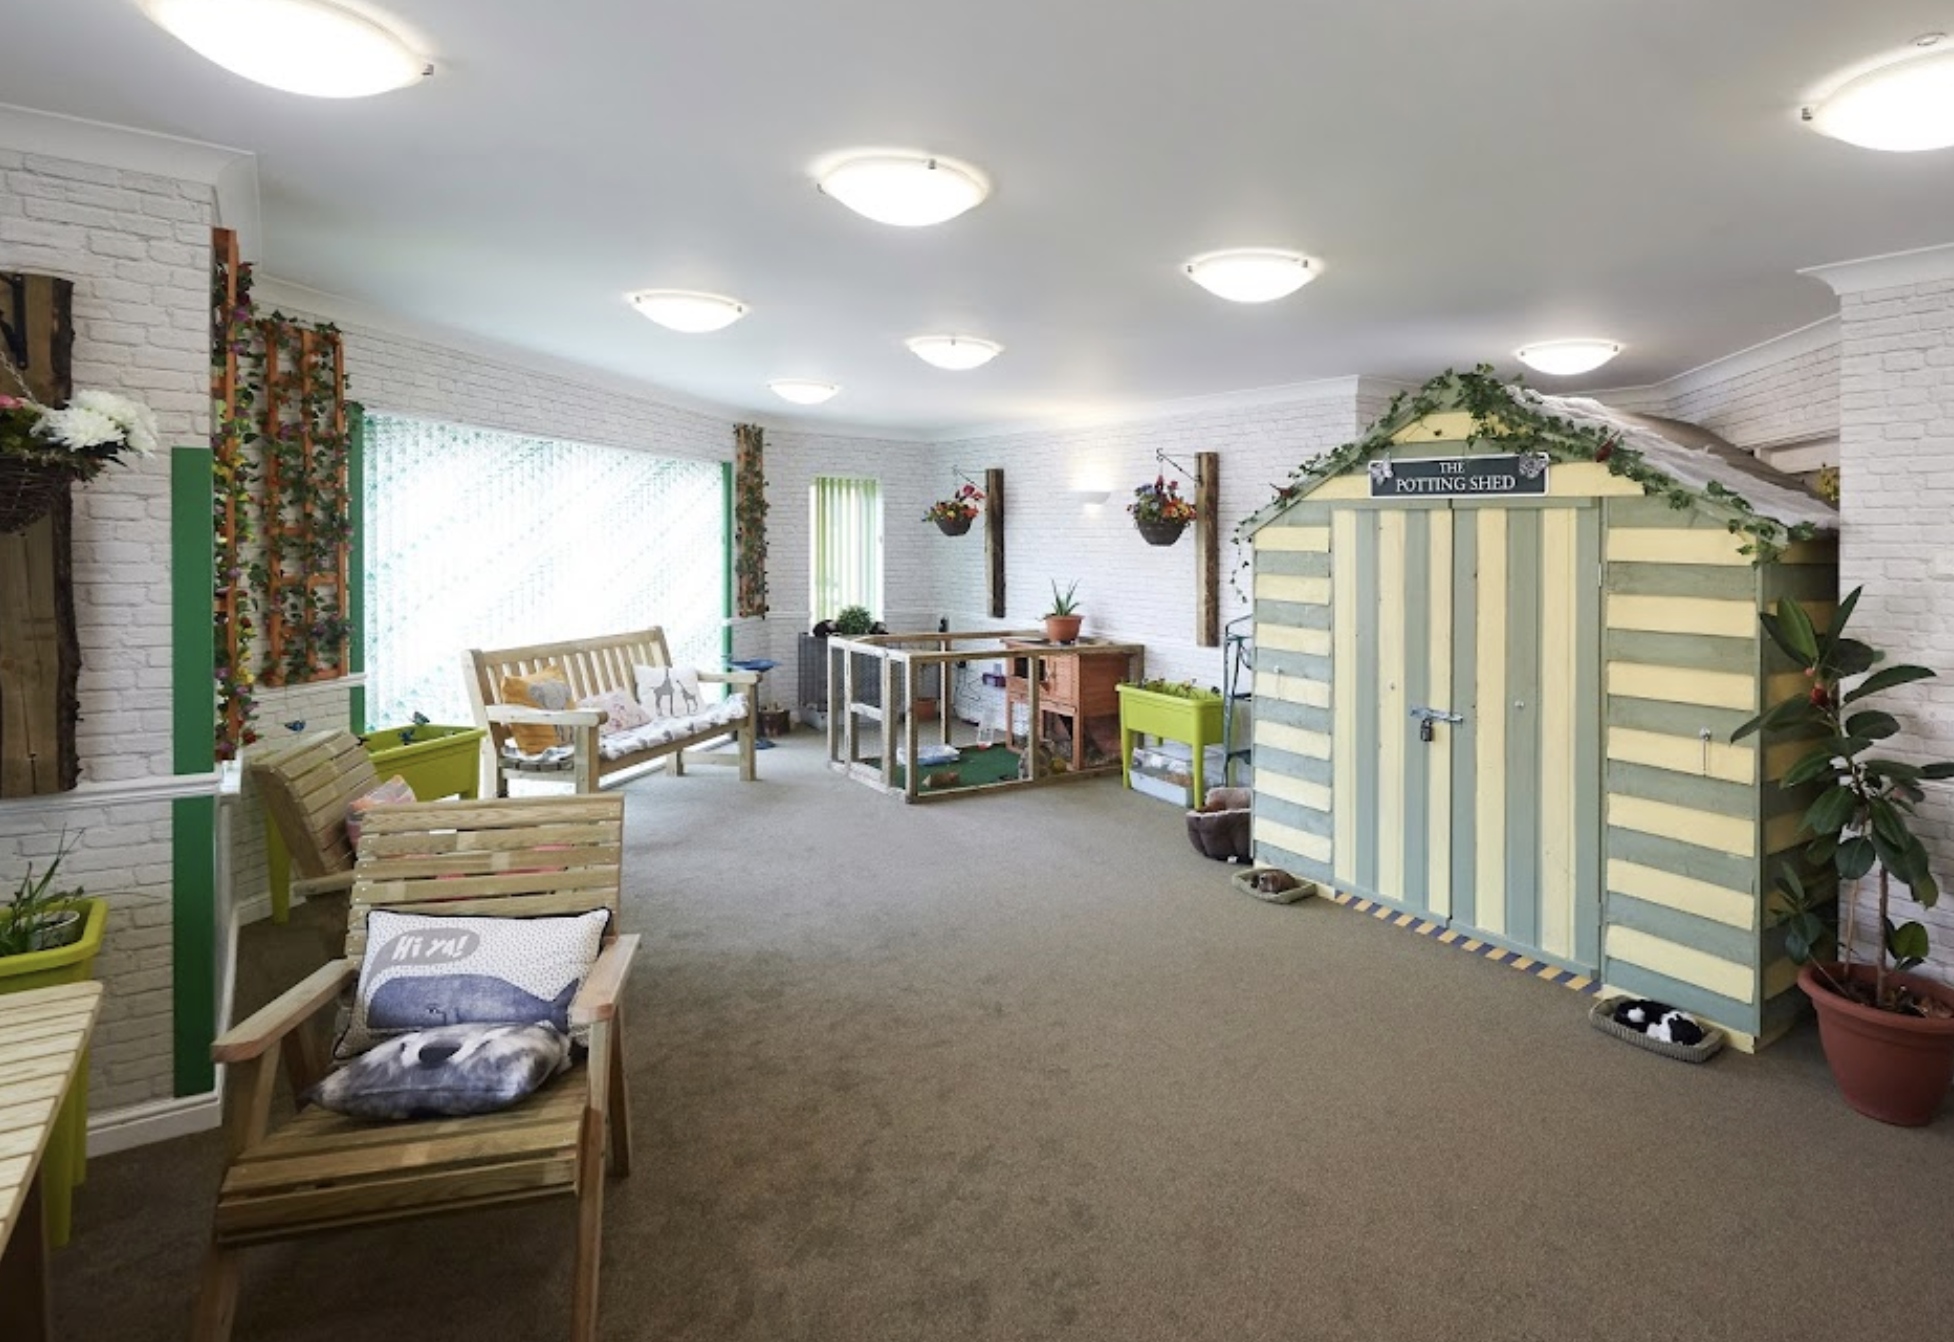 Activity Room at Canning Court Care Home in Stratford-upon-Avon, Warwickshire